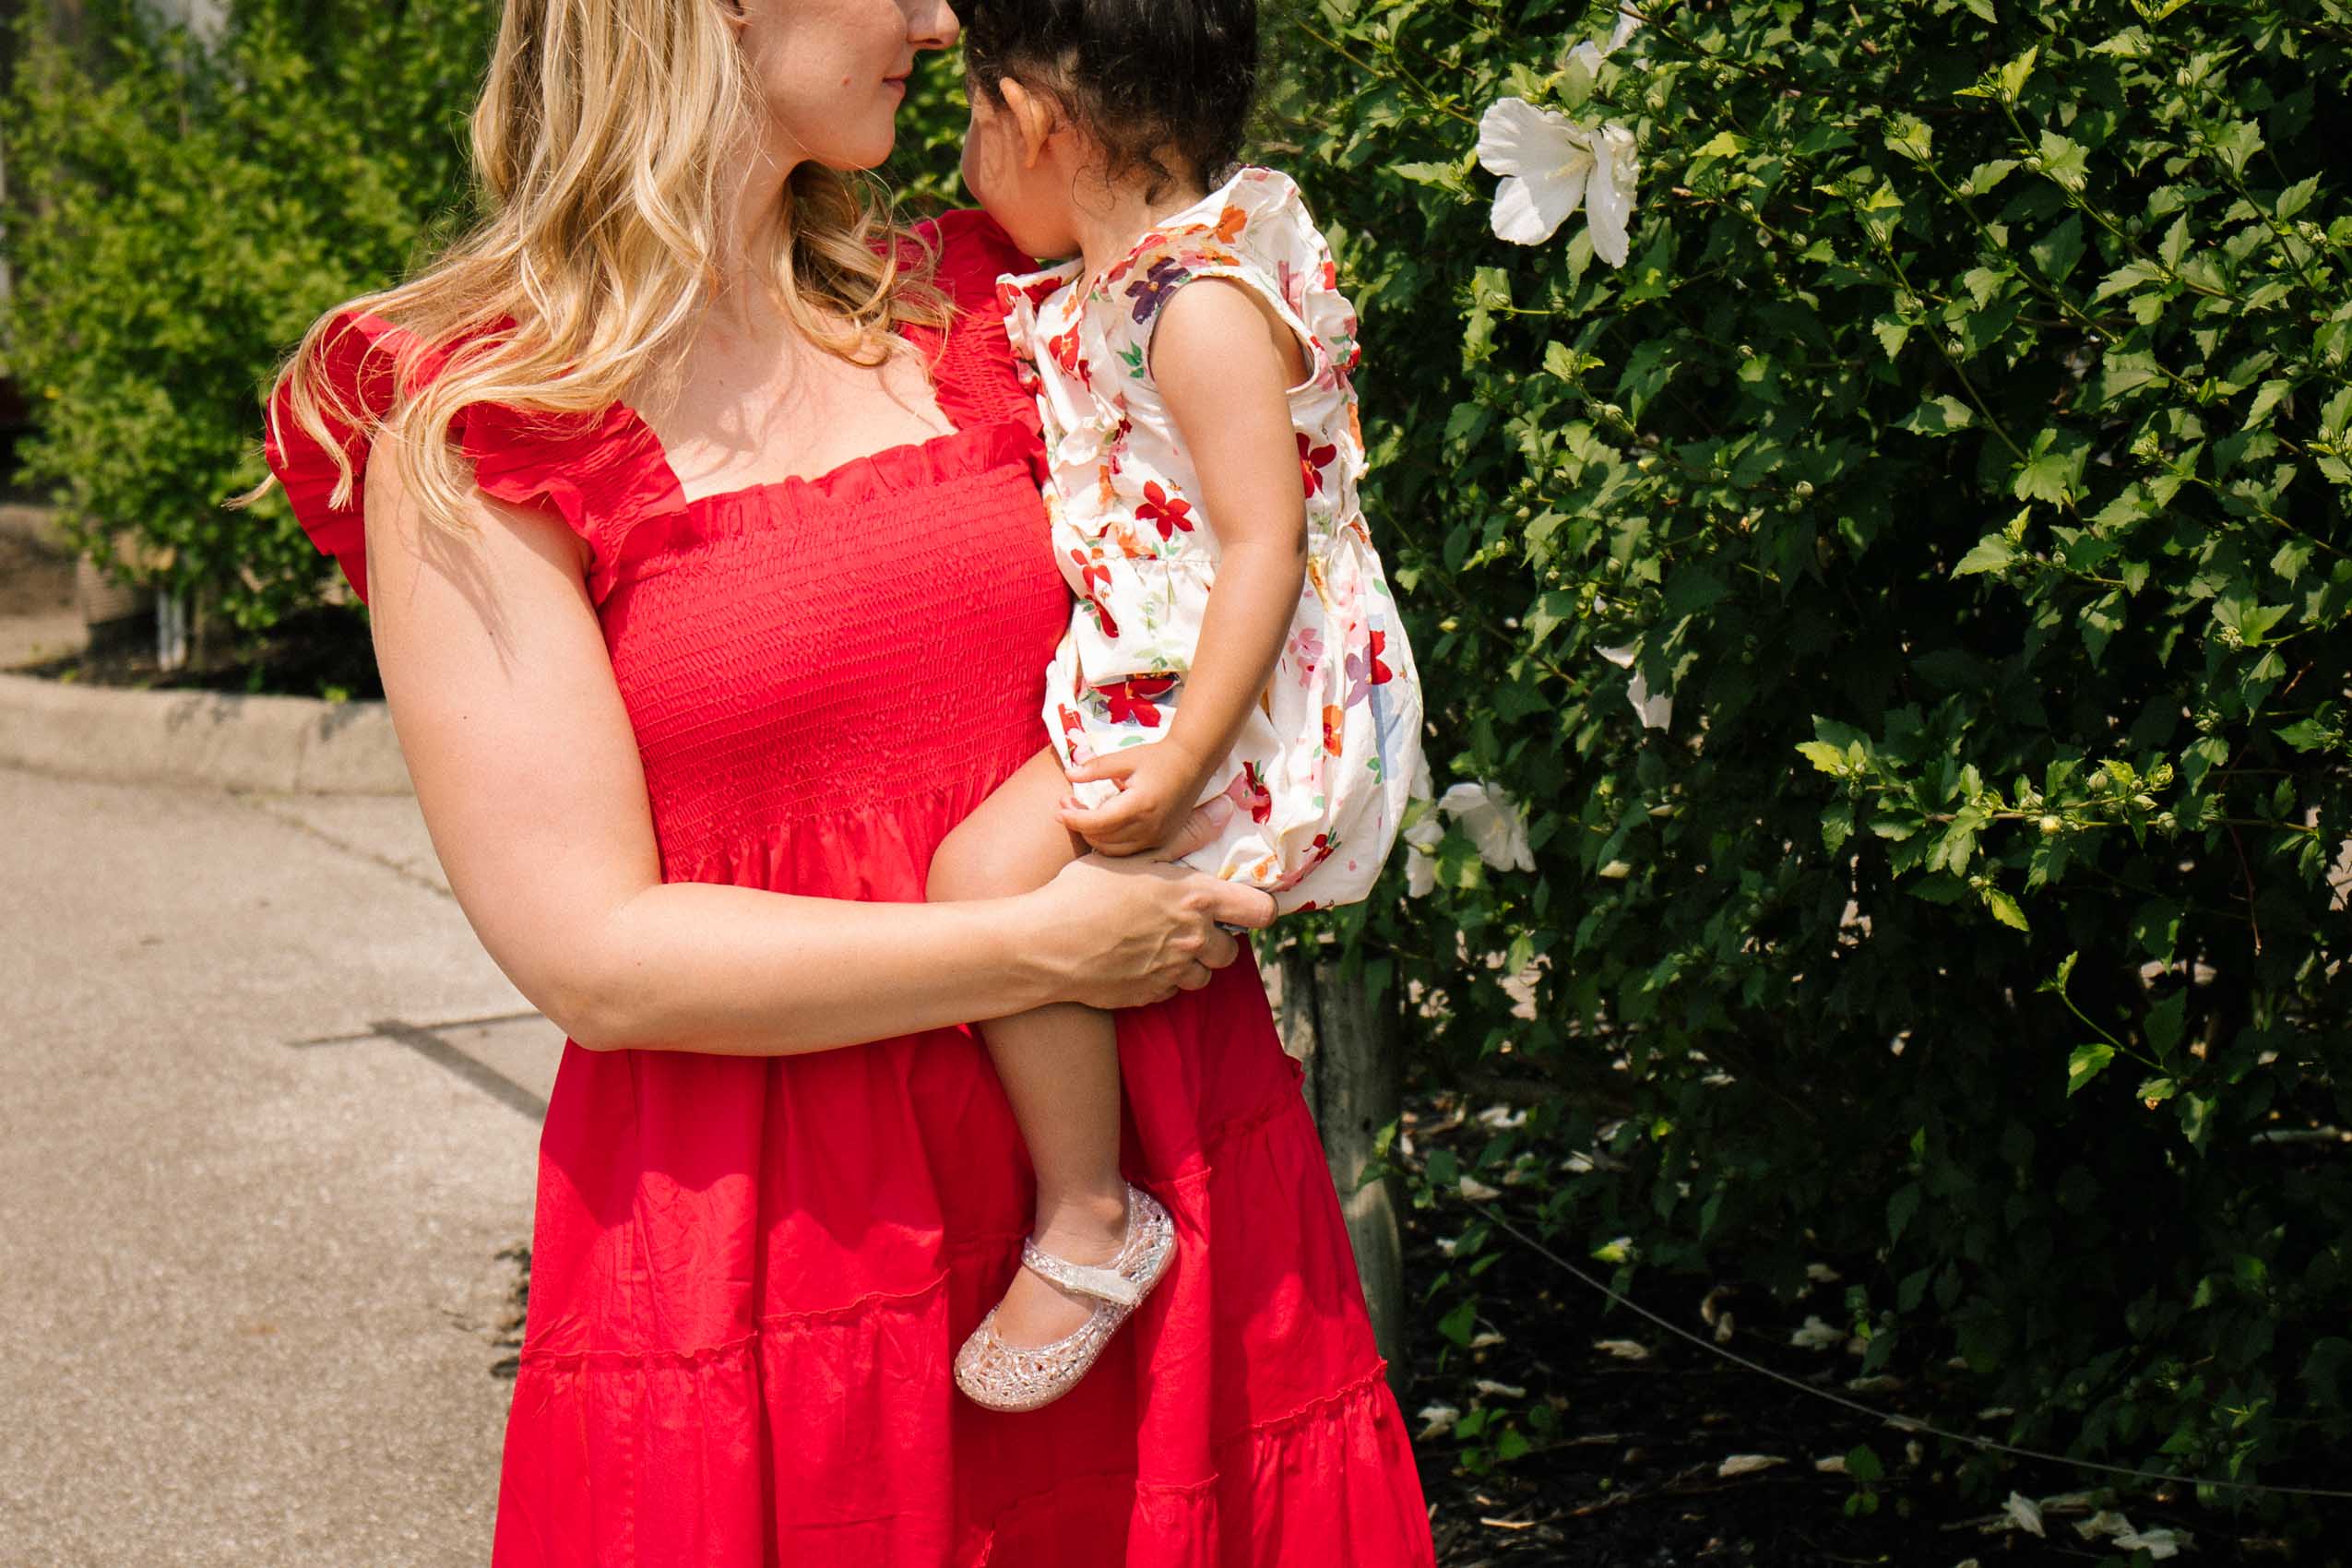 woman wearing a sleeveless red nap dress while holding a toddler